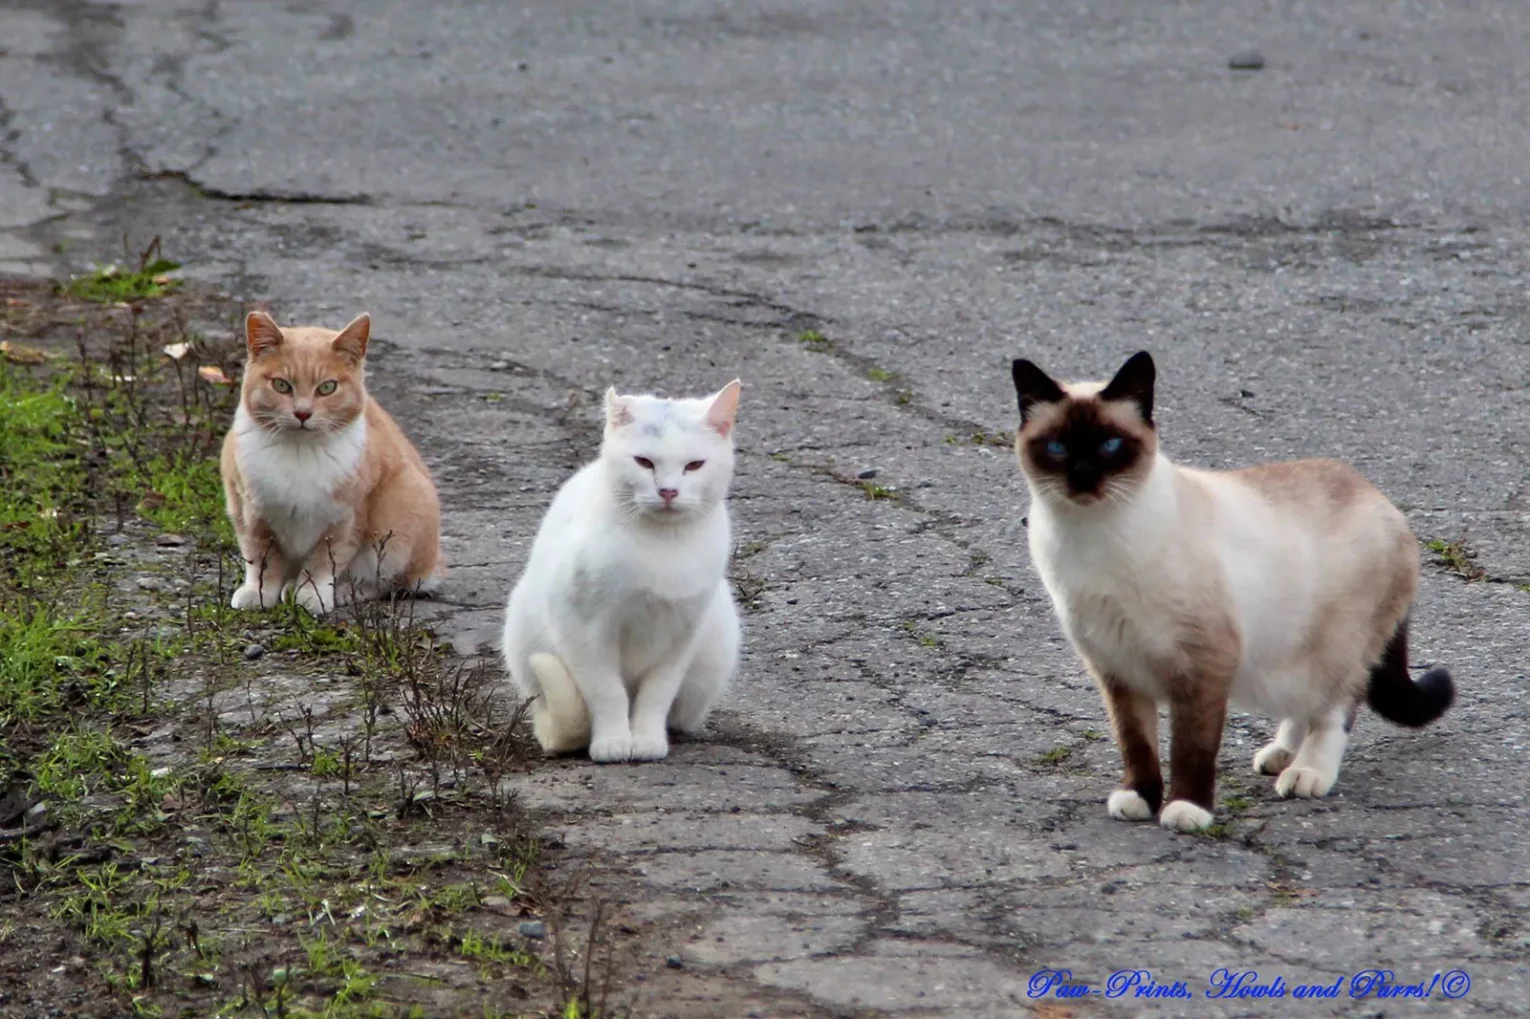 gang cats Alaksa 1530x1019 - Understanding and Managing Mixed Signals: The Behavior of Adopted Feral and Fostered Cats